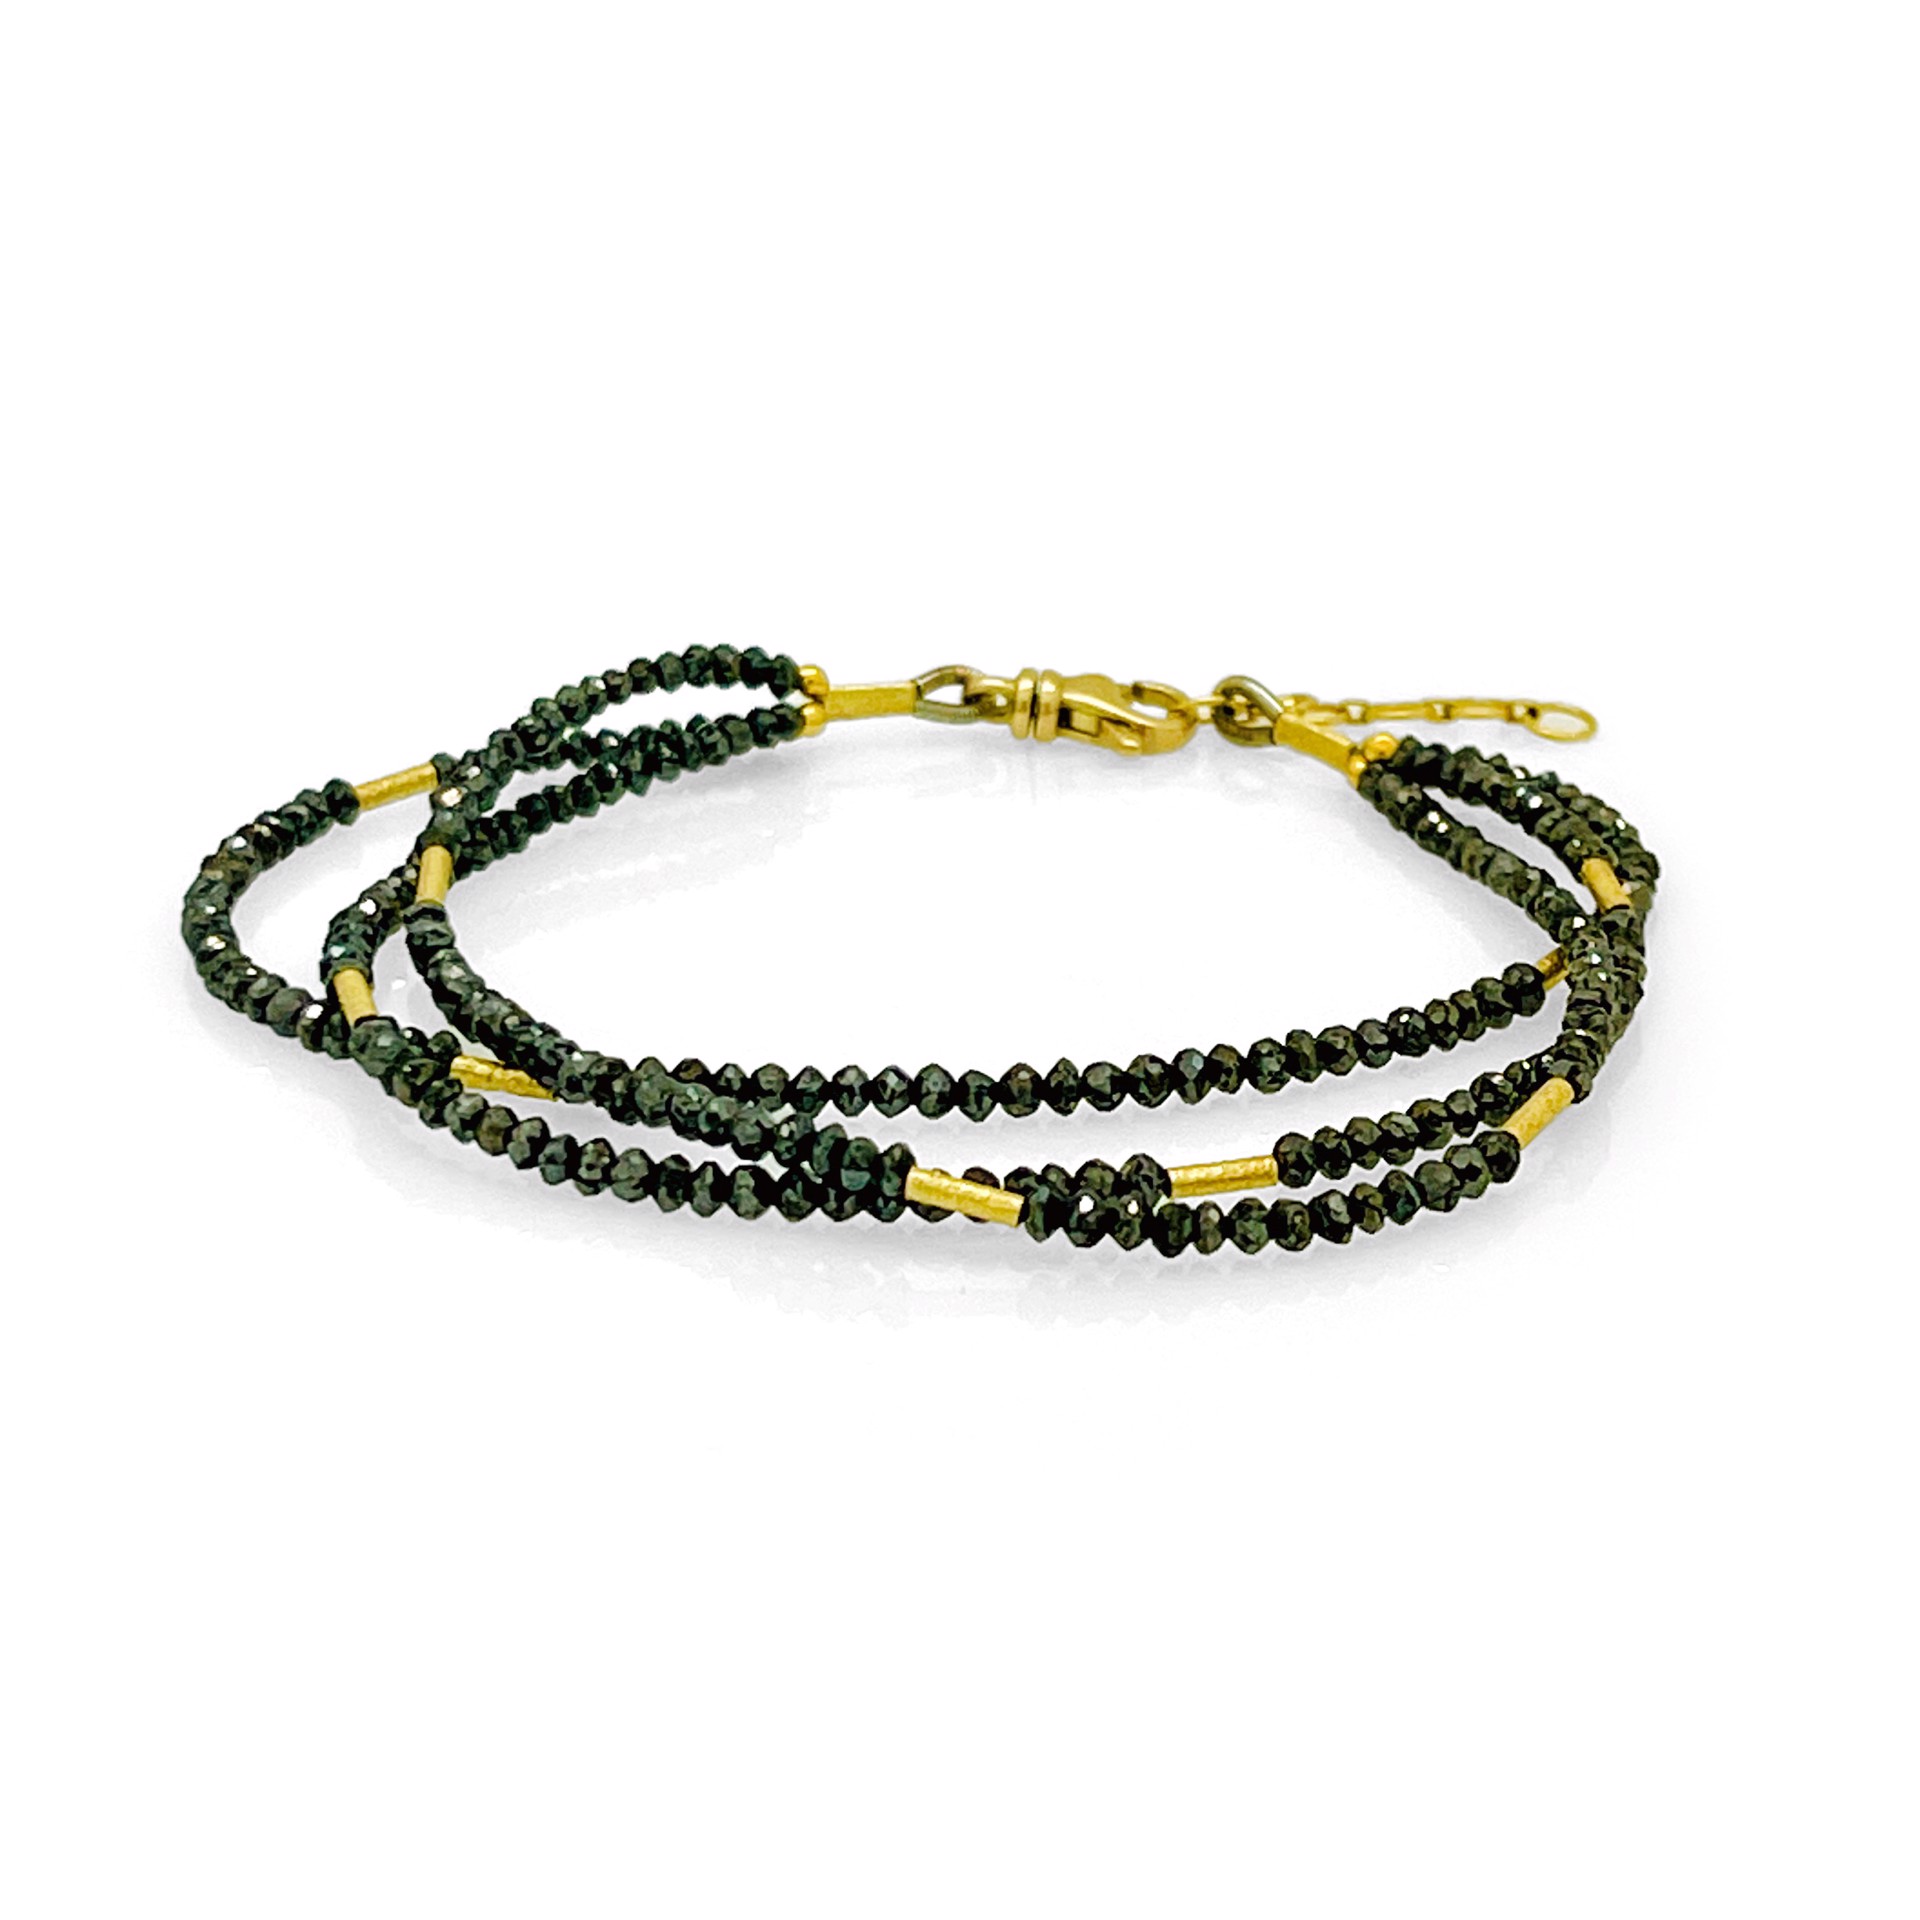 Daily Diamonds Bracelet - triple strand black faceted diamonds 16 cts 18k gold by Mara Labell